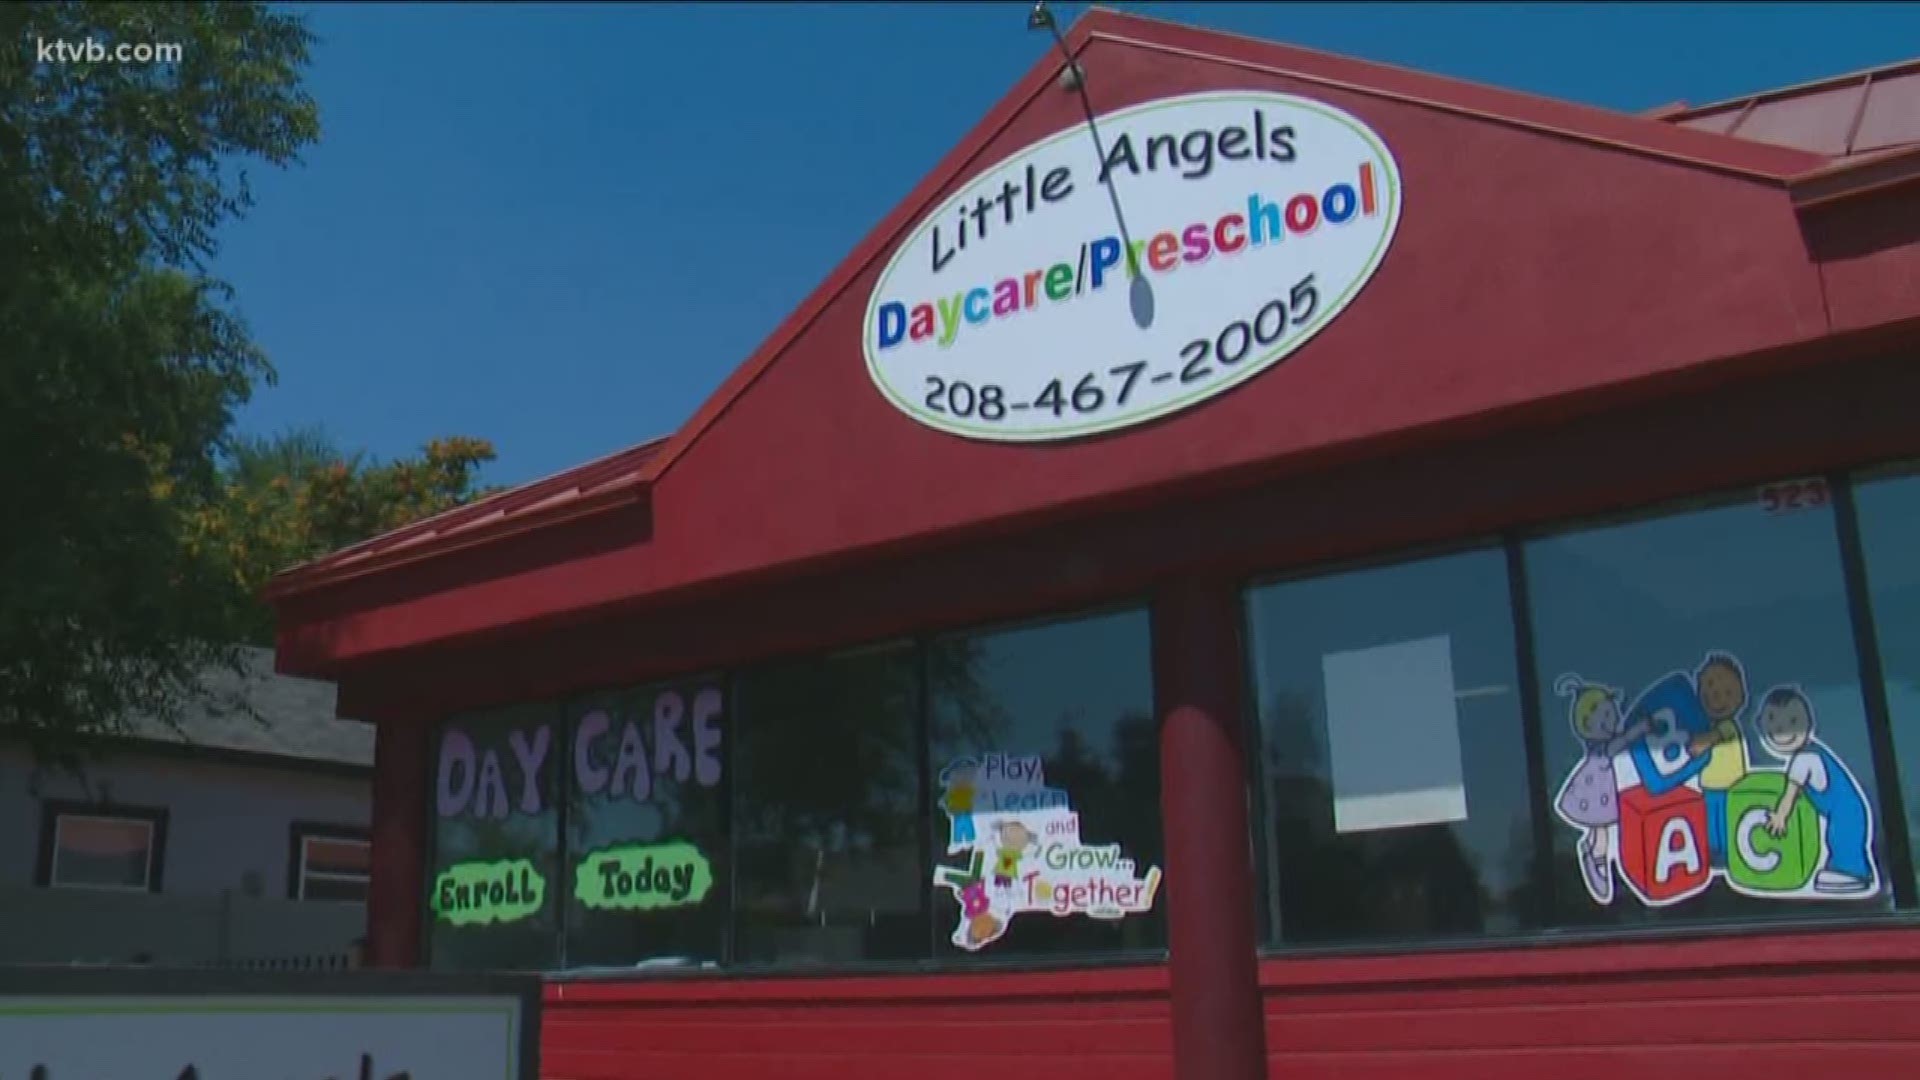 Littlle Angels has lost its license to operate after the incident.